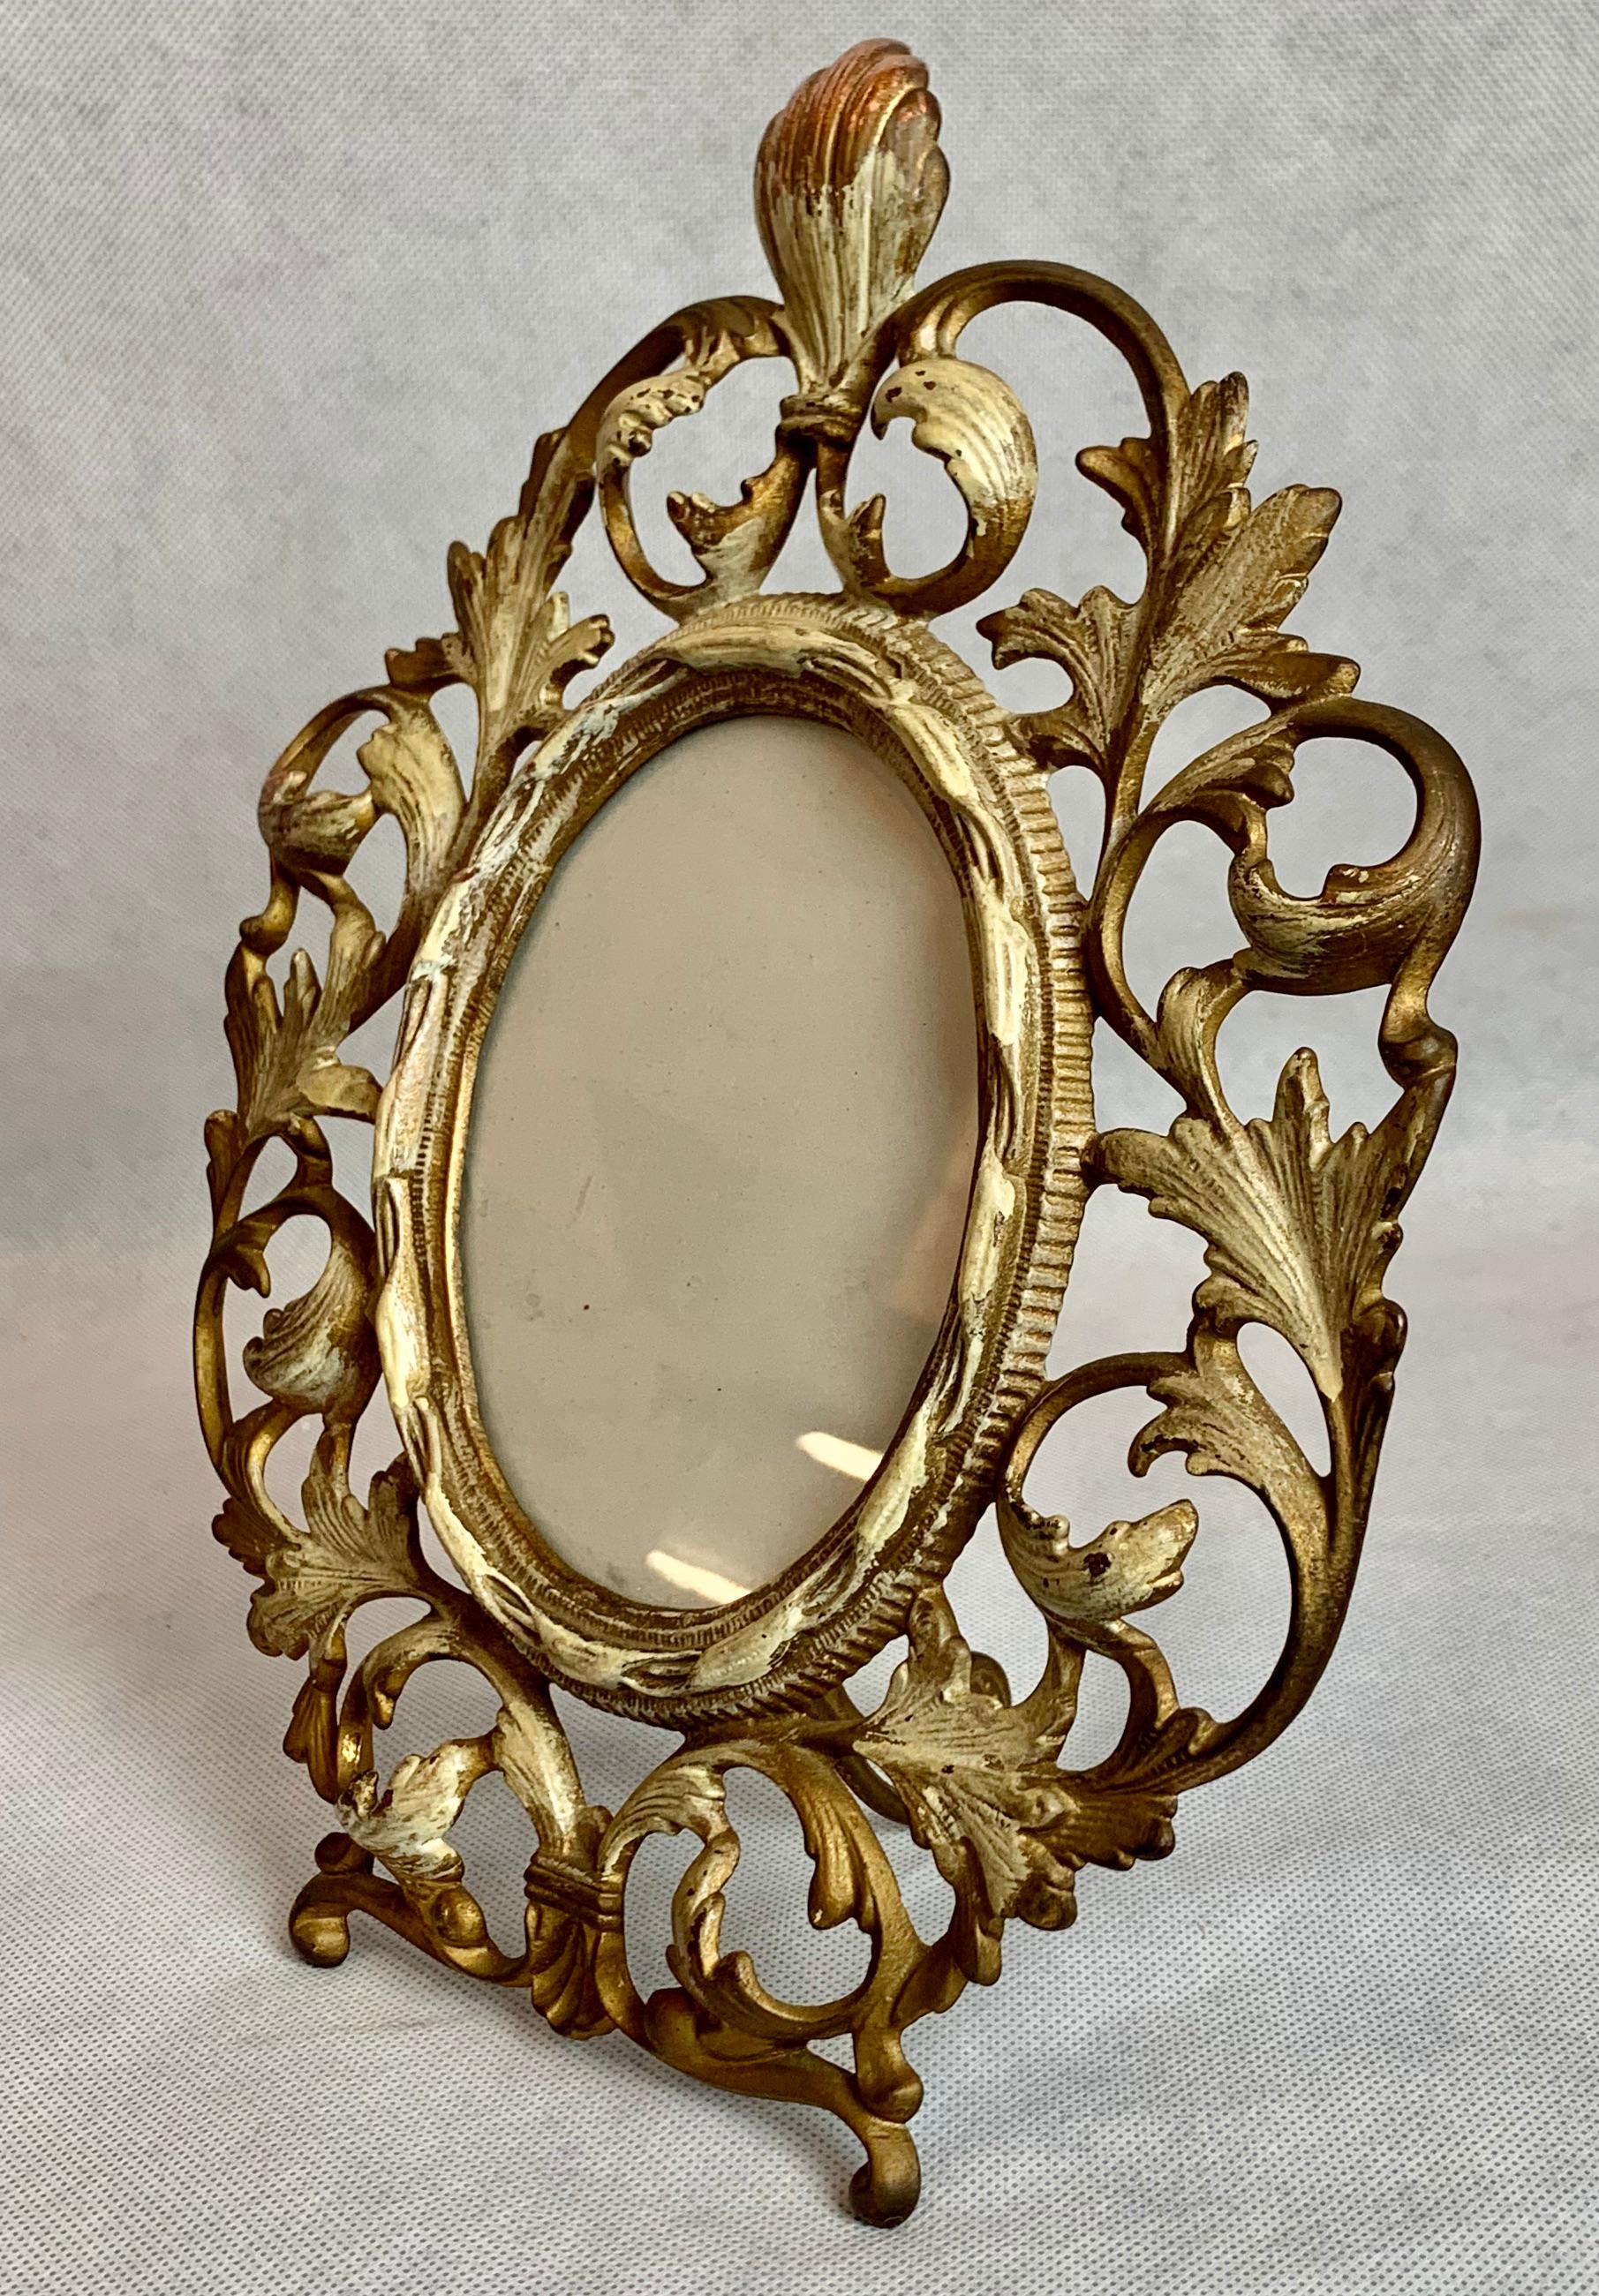 Victorian ovoid gilt and patinated photo frame with an easel back. The design is of scrolling acanthus leaves while the inner oval has a border of twisted ribbon.

Measures: H 11.25